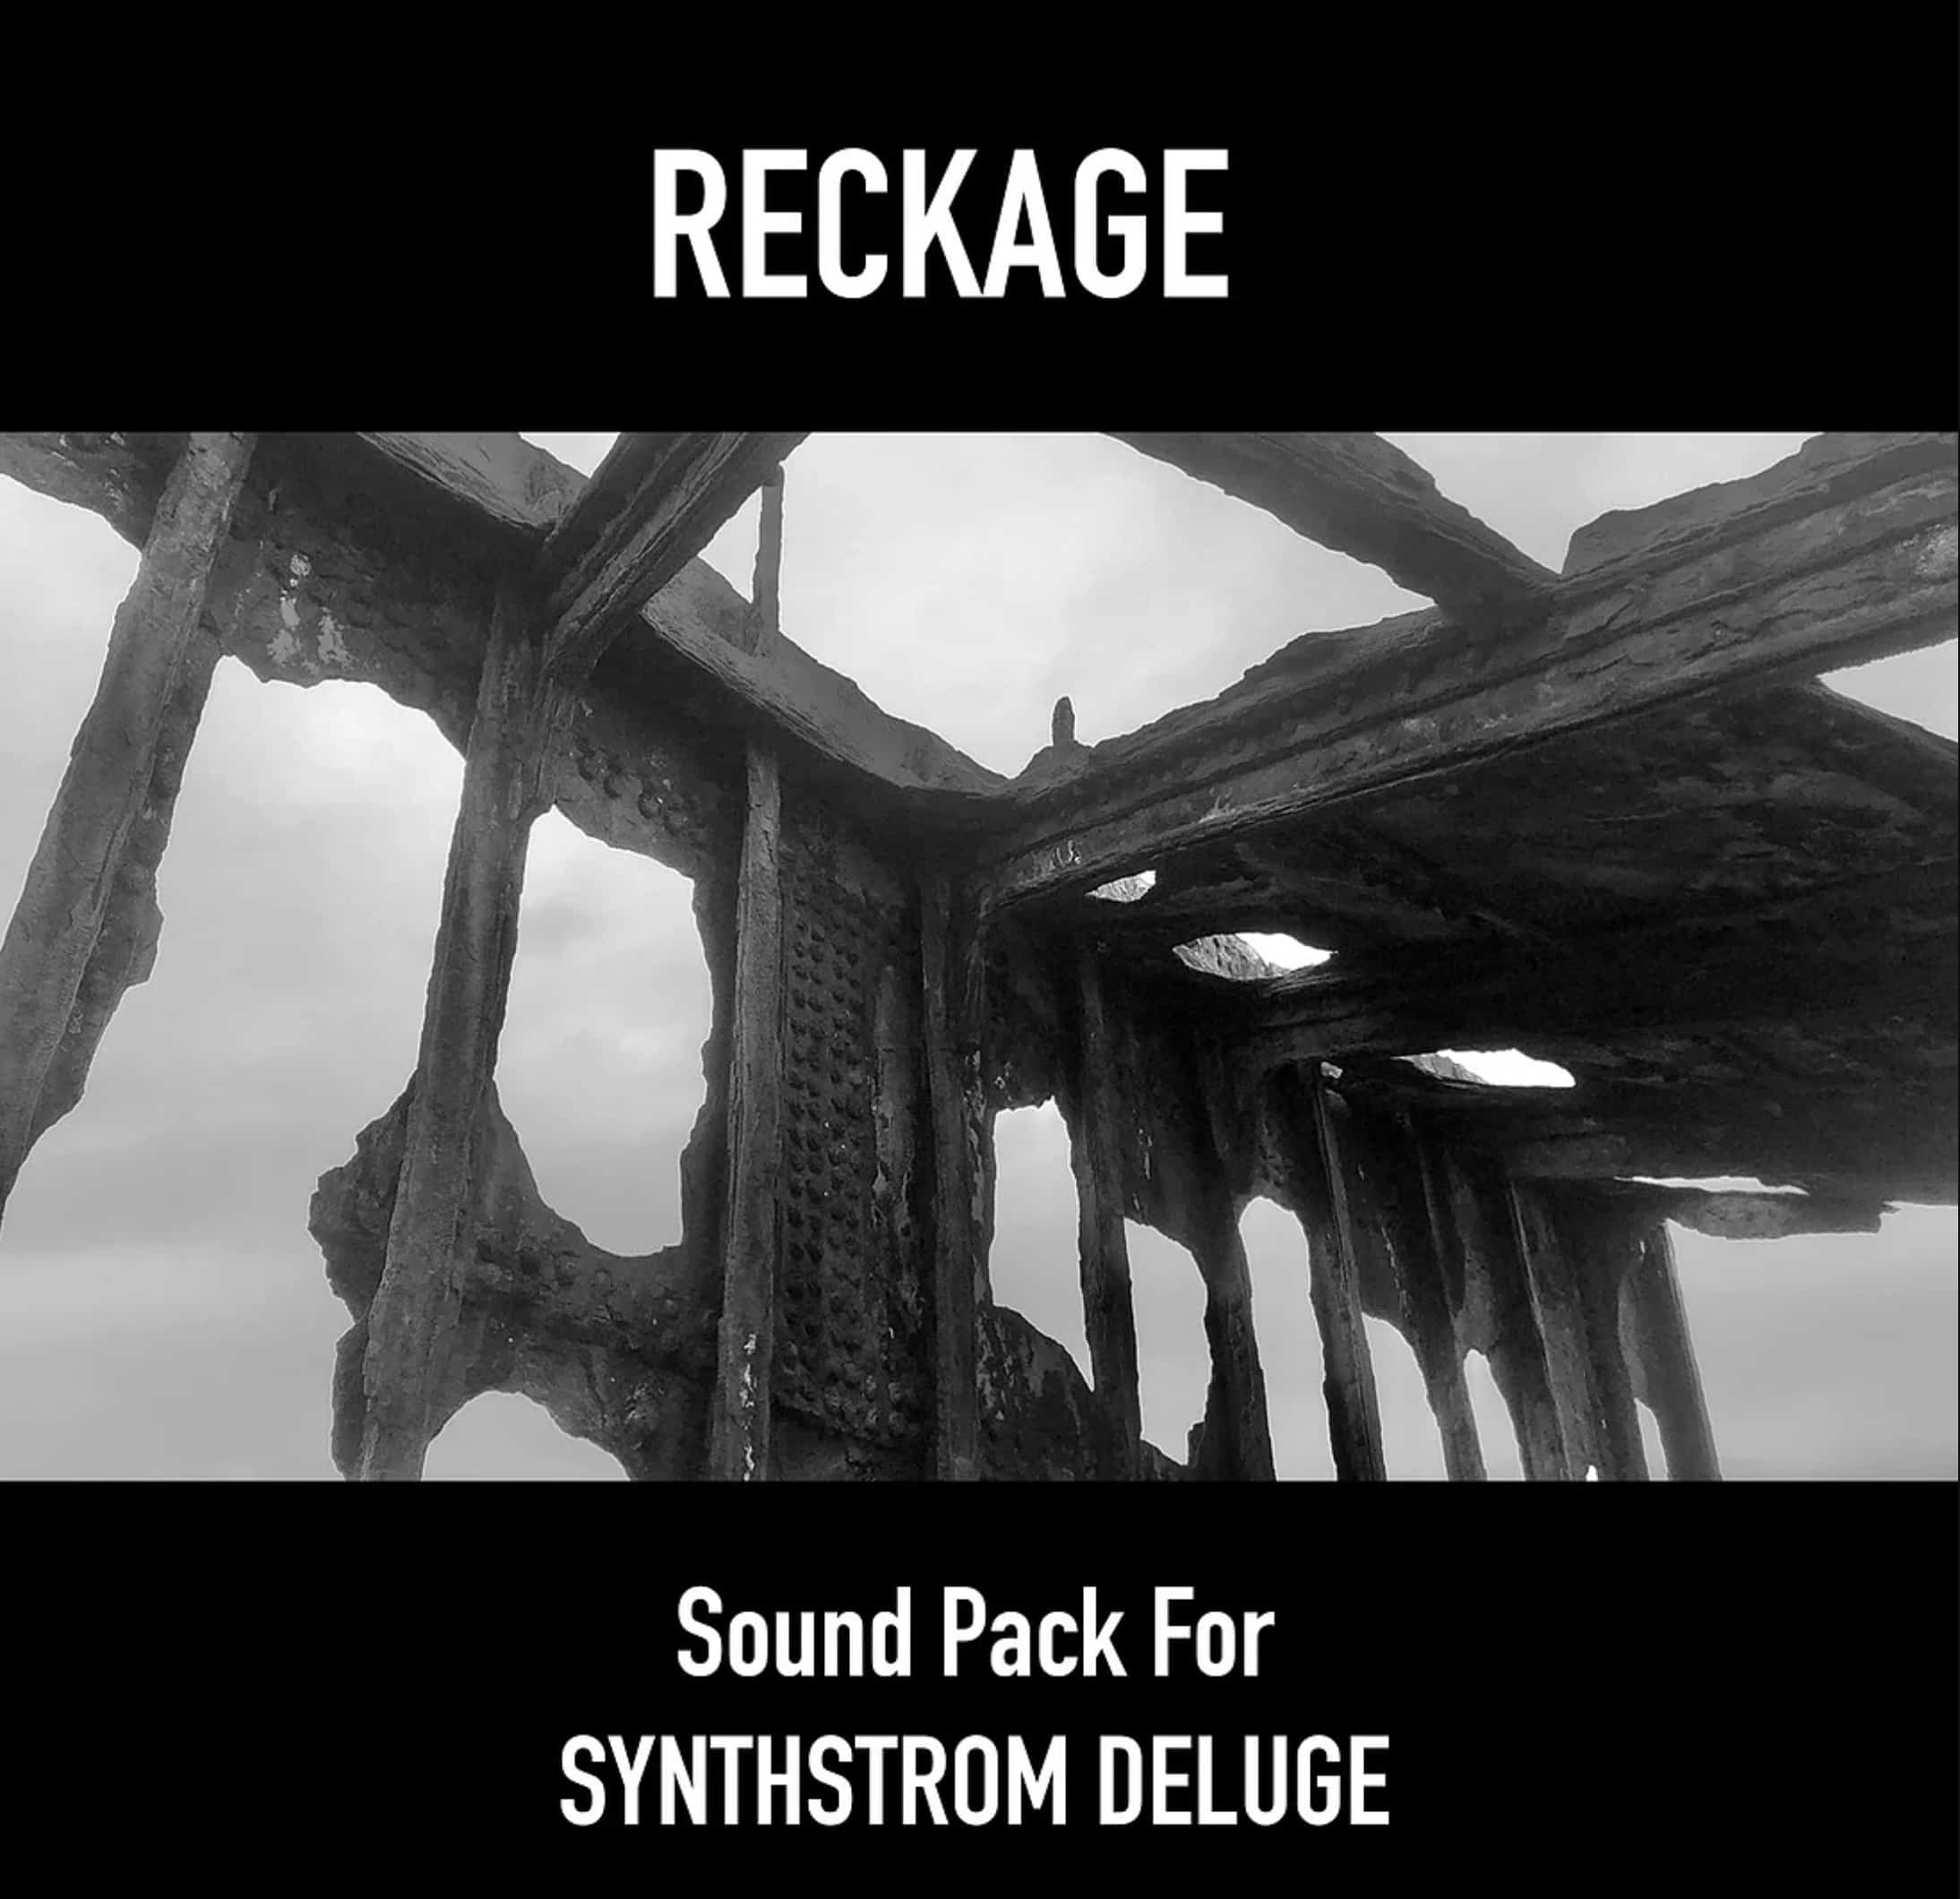 "Reckage" Dark Ambient Sound Pack for Synthstrom Deluge